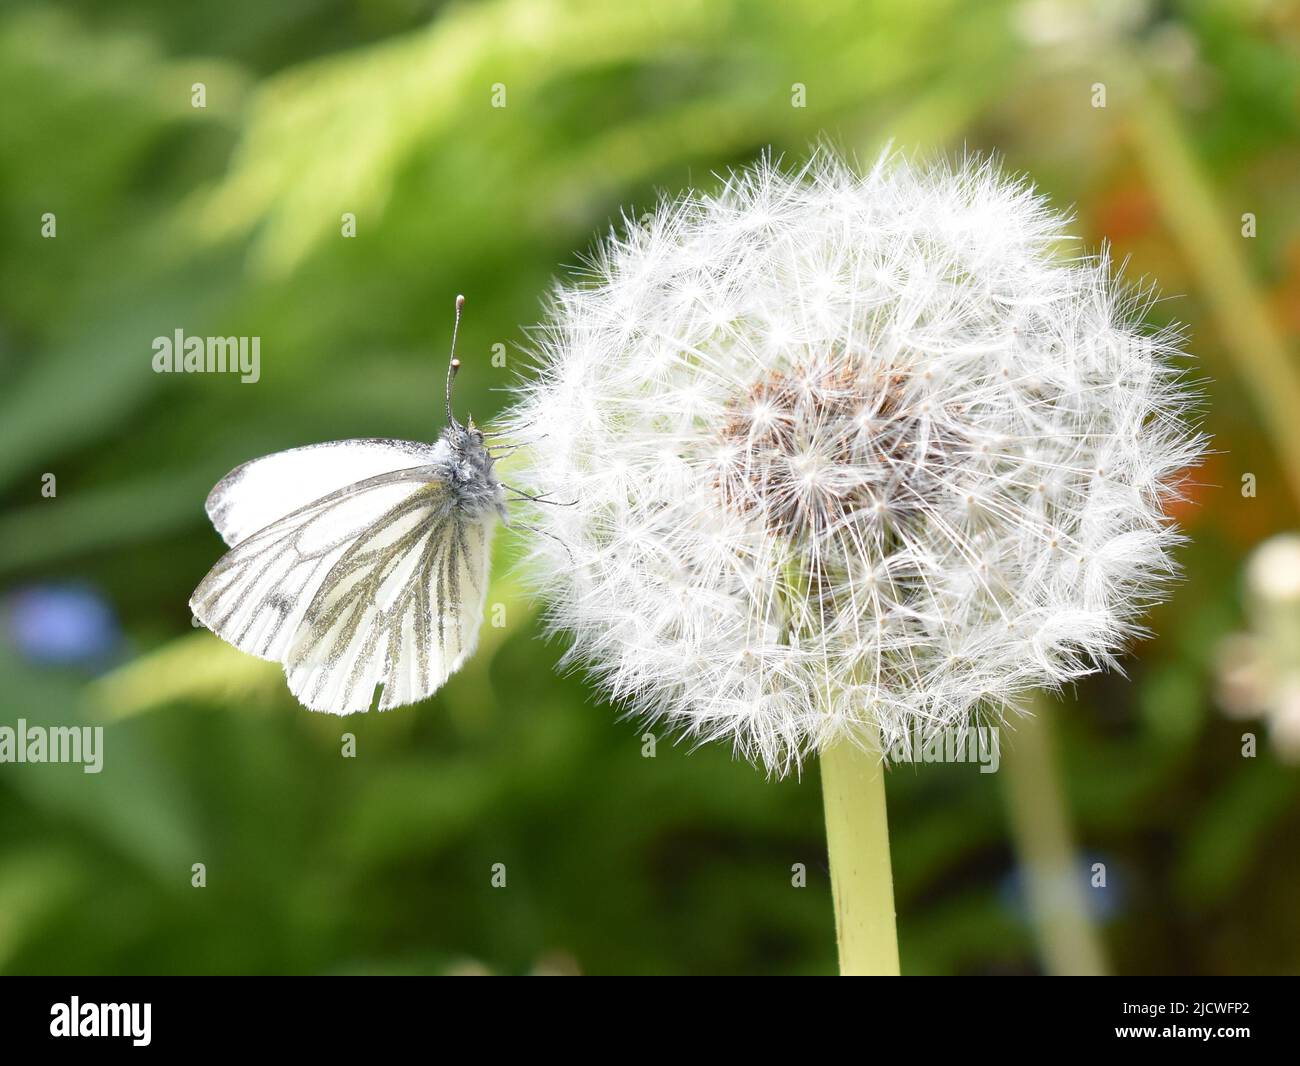 White cabbage butterfly sitting on a dandelion seed blowball Stock Photo